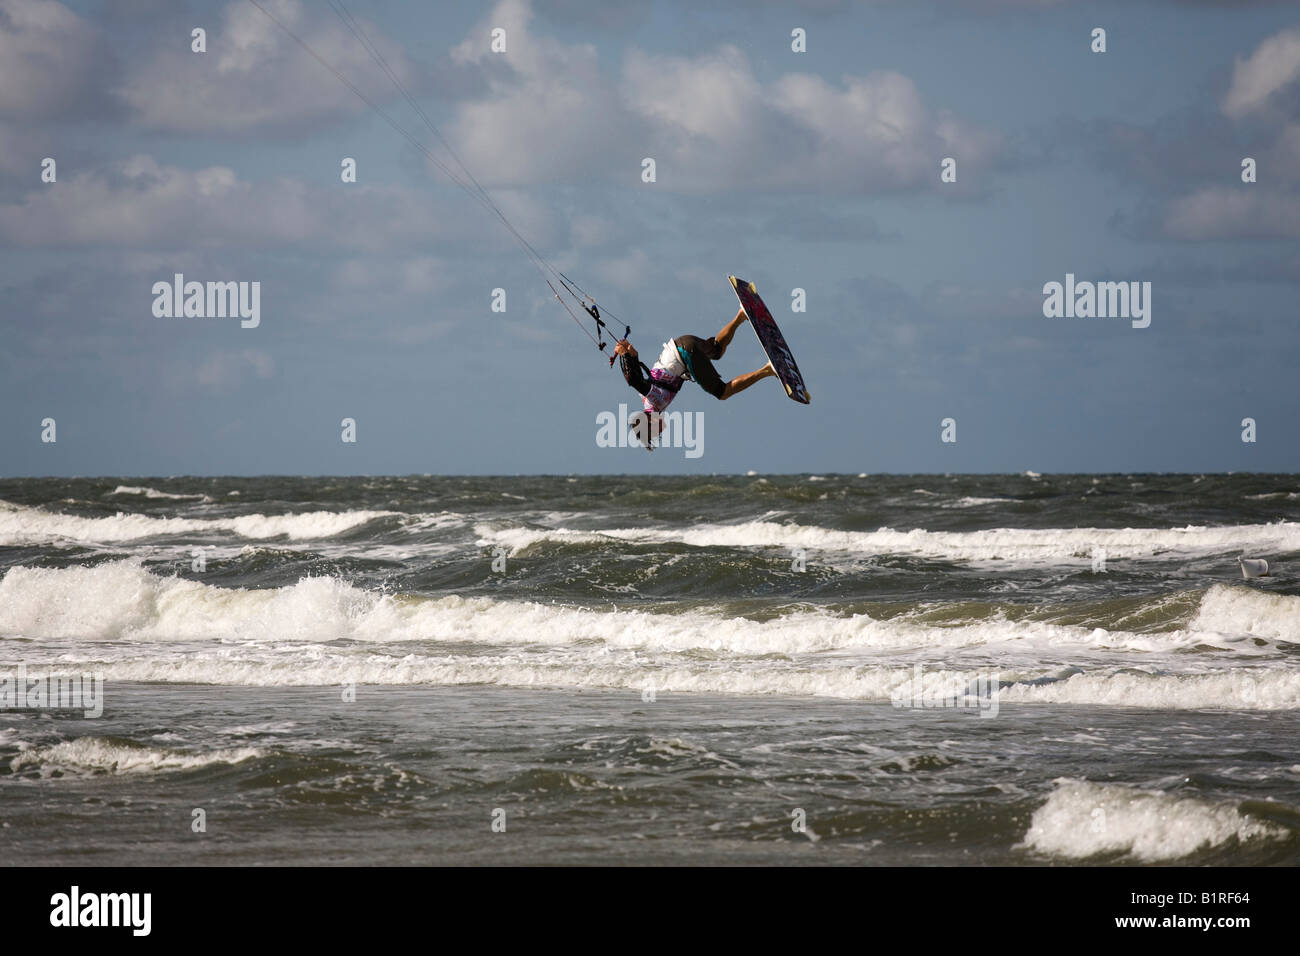 Aaron Hadlow from Great Britain, three-time world champion, achieves second place in the Freestyle section at the Gard Kitesurf Stock Photo